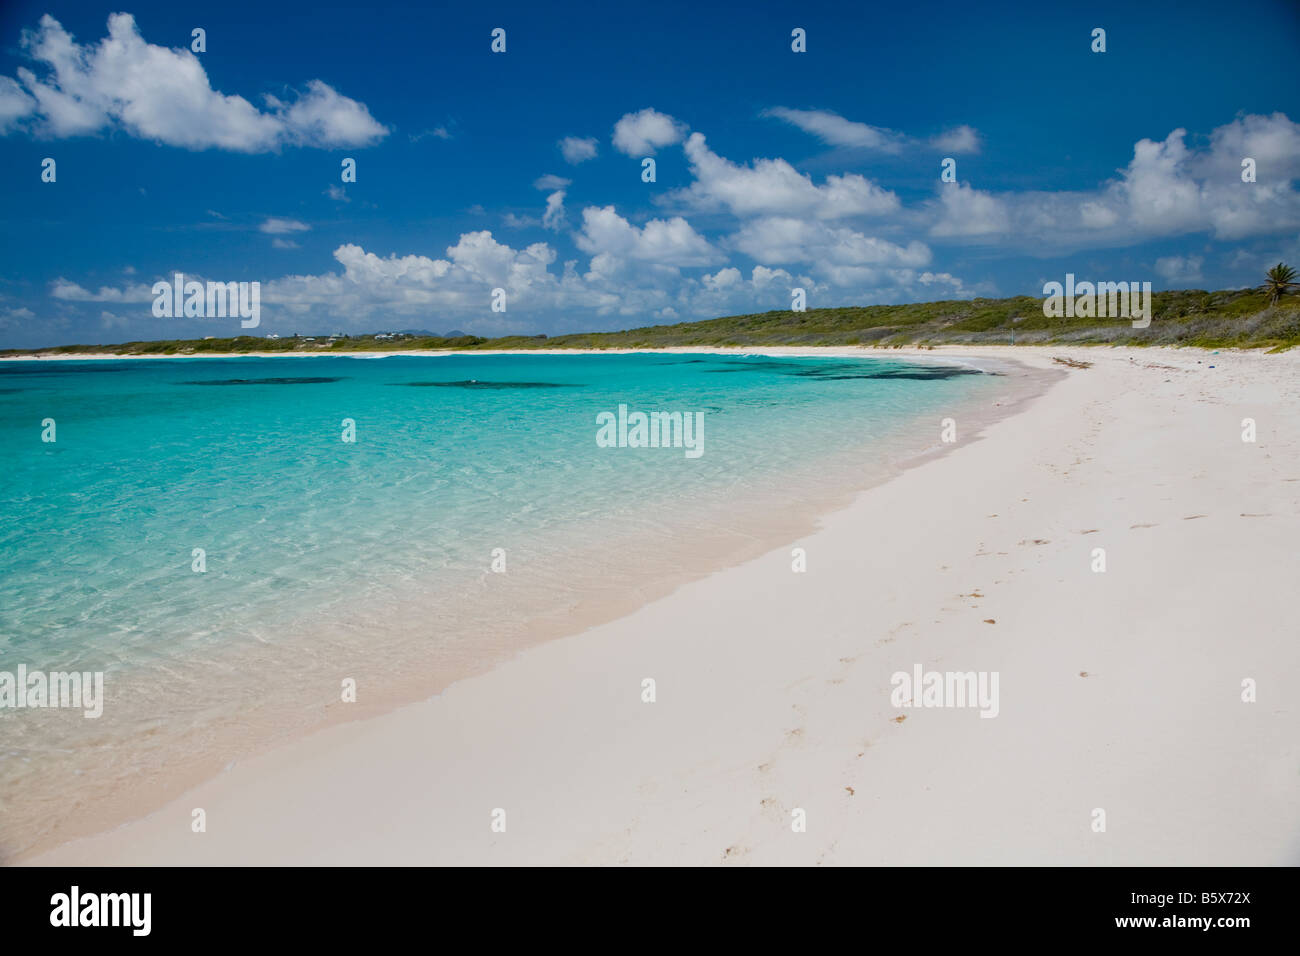 Savannah Bay on the caribbean island of Anguilla in the British West Indies Stock Photo